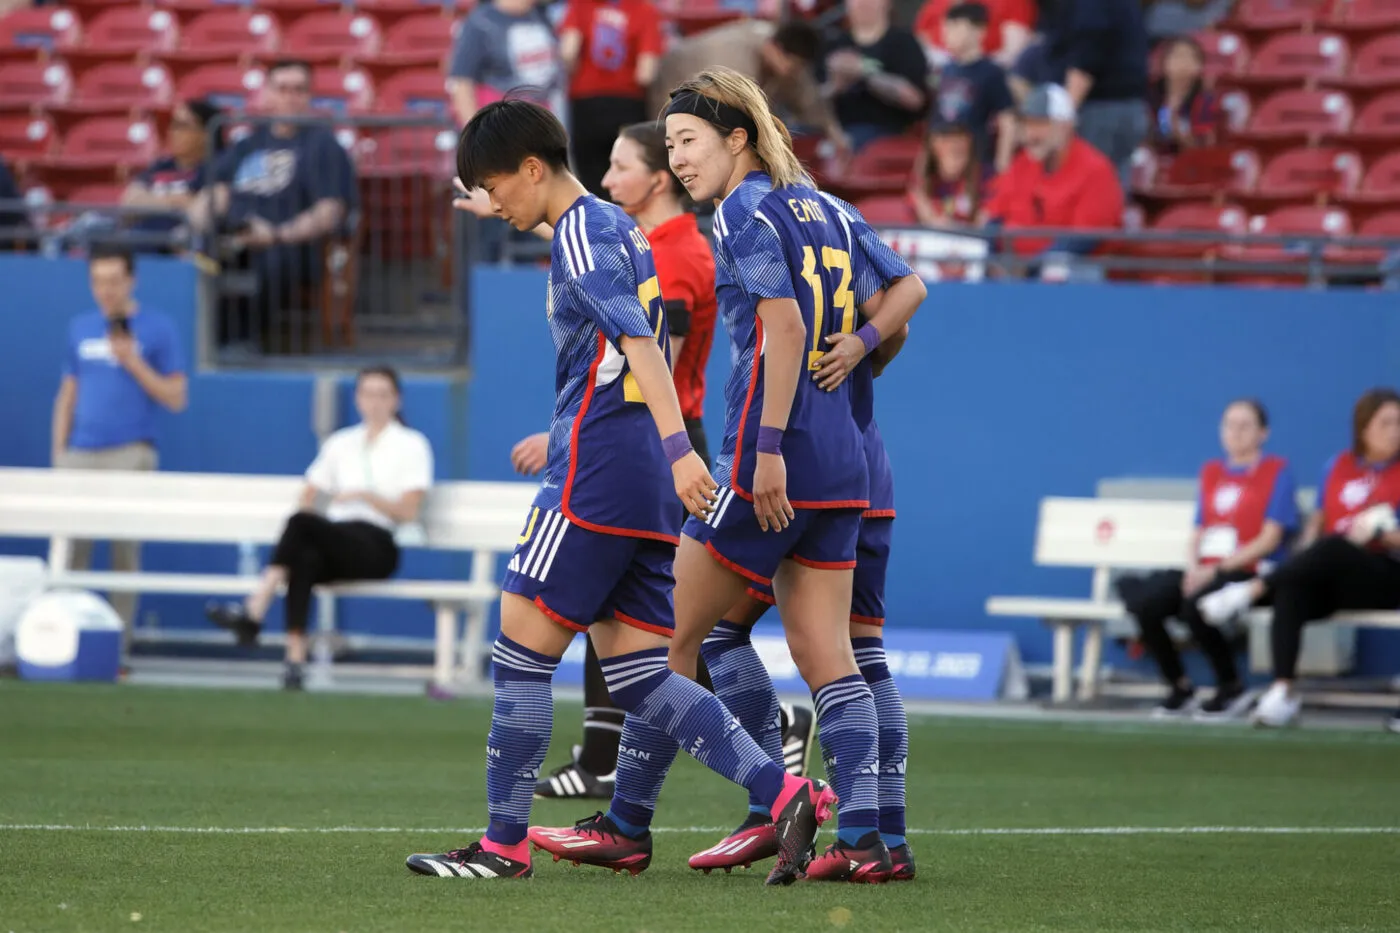 Japan’s Jin Endo (13) scores a goal in the 77th minute to put Japan ahead 3-0 over Canada in the 2023 SHEBELIEVES CUP Canada vs Japan at Toyota Stadium in Frisco, Texas on Wednesday February 22, 2023. (Photo by Ed Kelly/Image of Sport/Sipa USA) - Photo by Icon sport